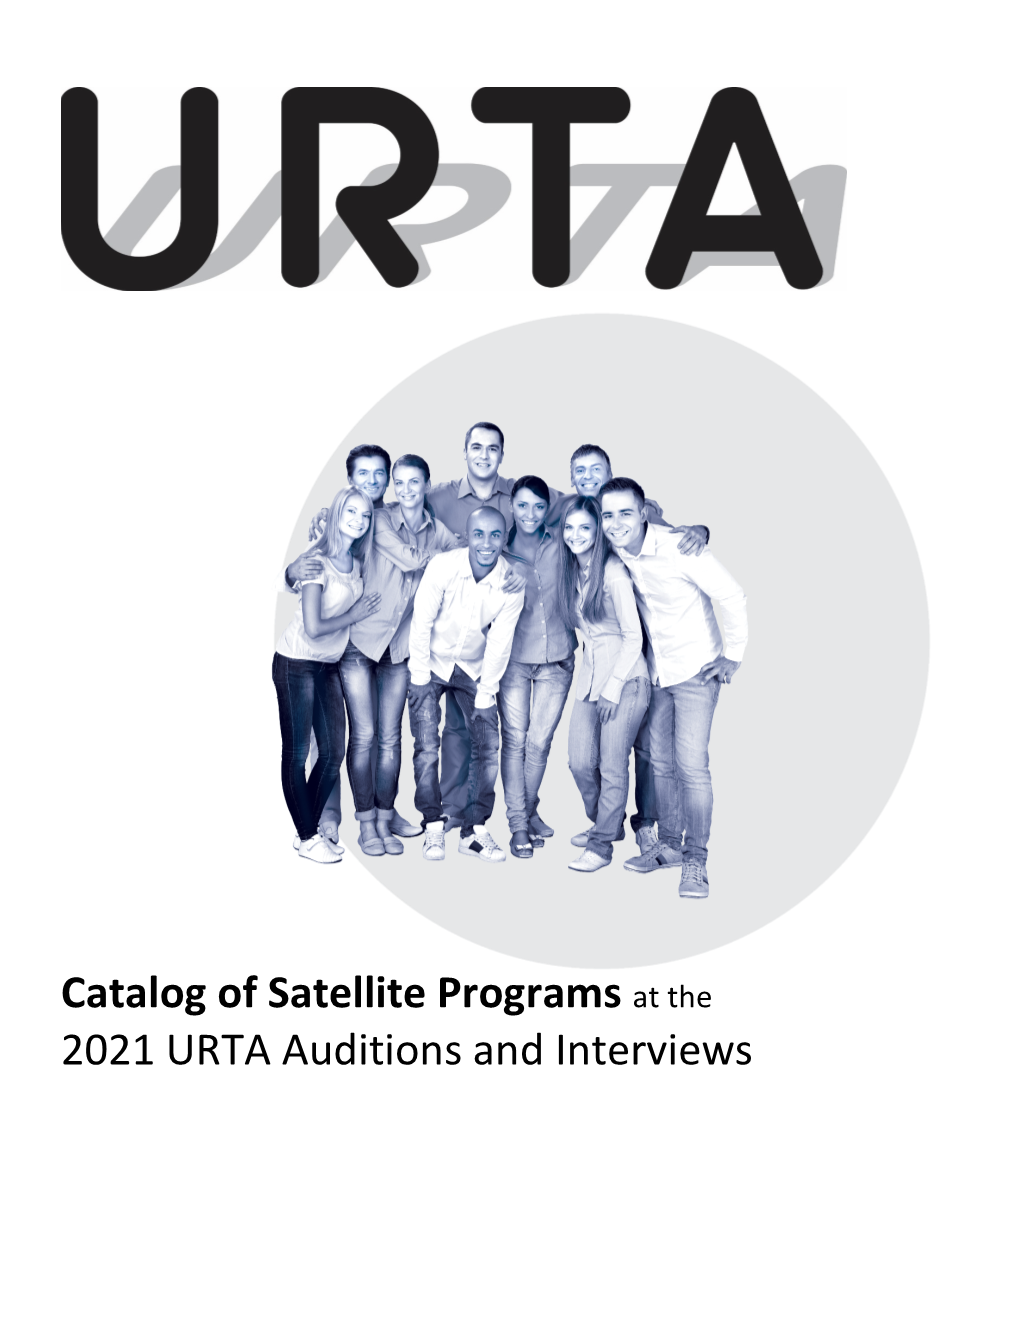 Catalog of Satellite Programs at the 2021 URTA Auditions and Interviews